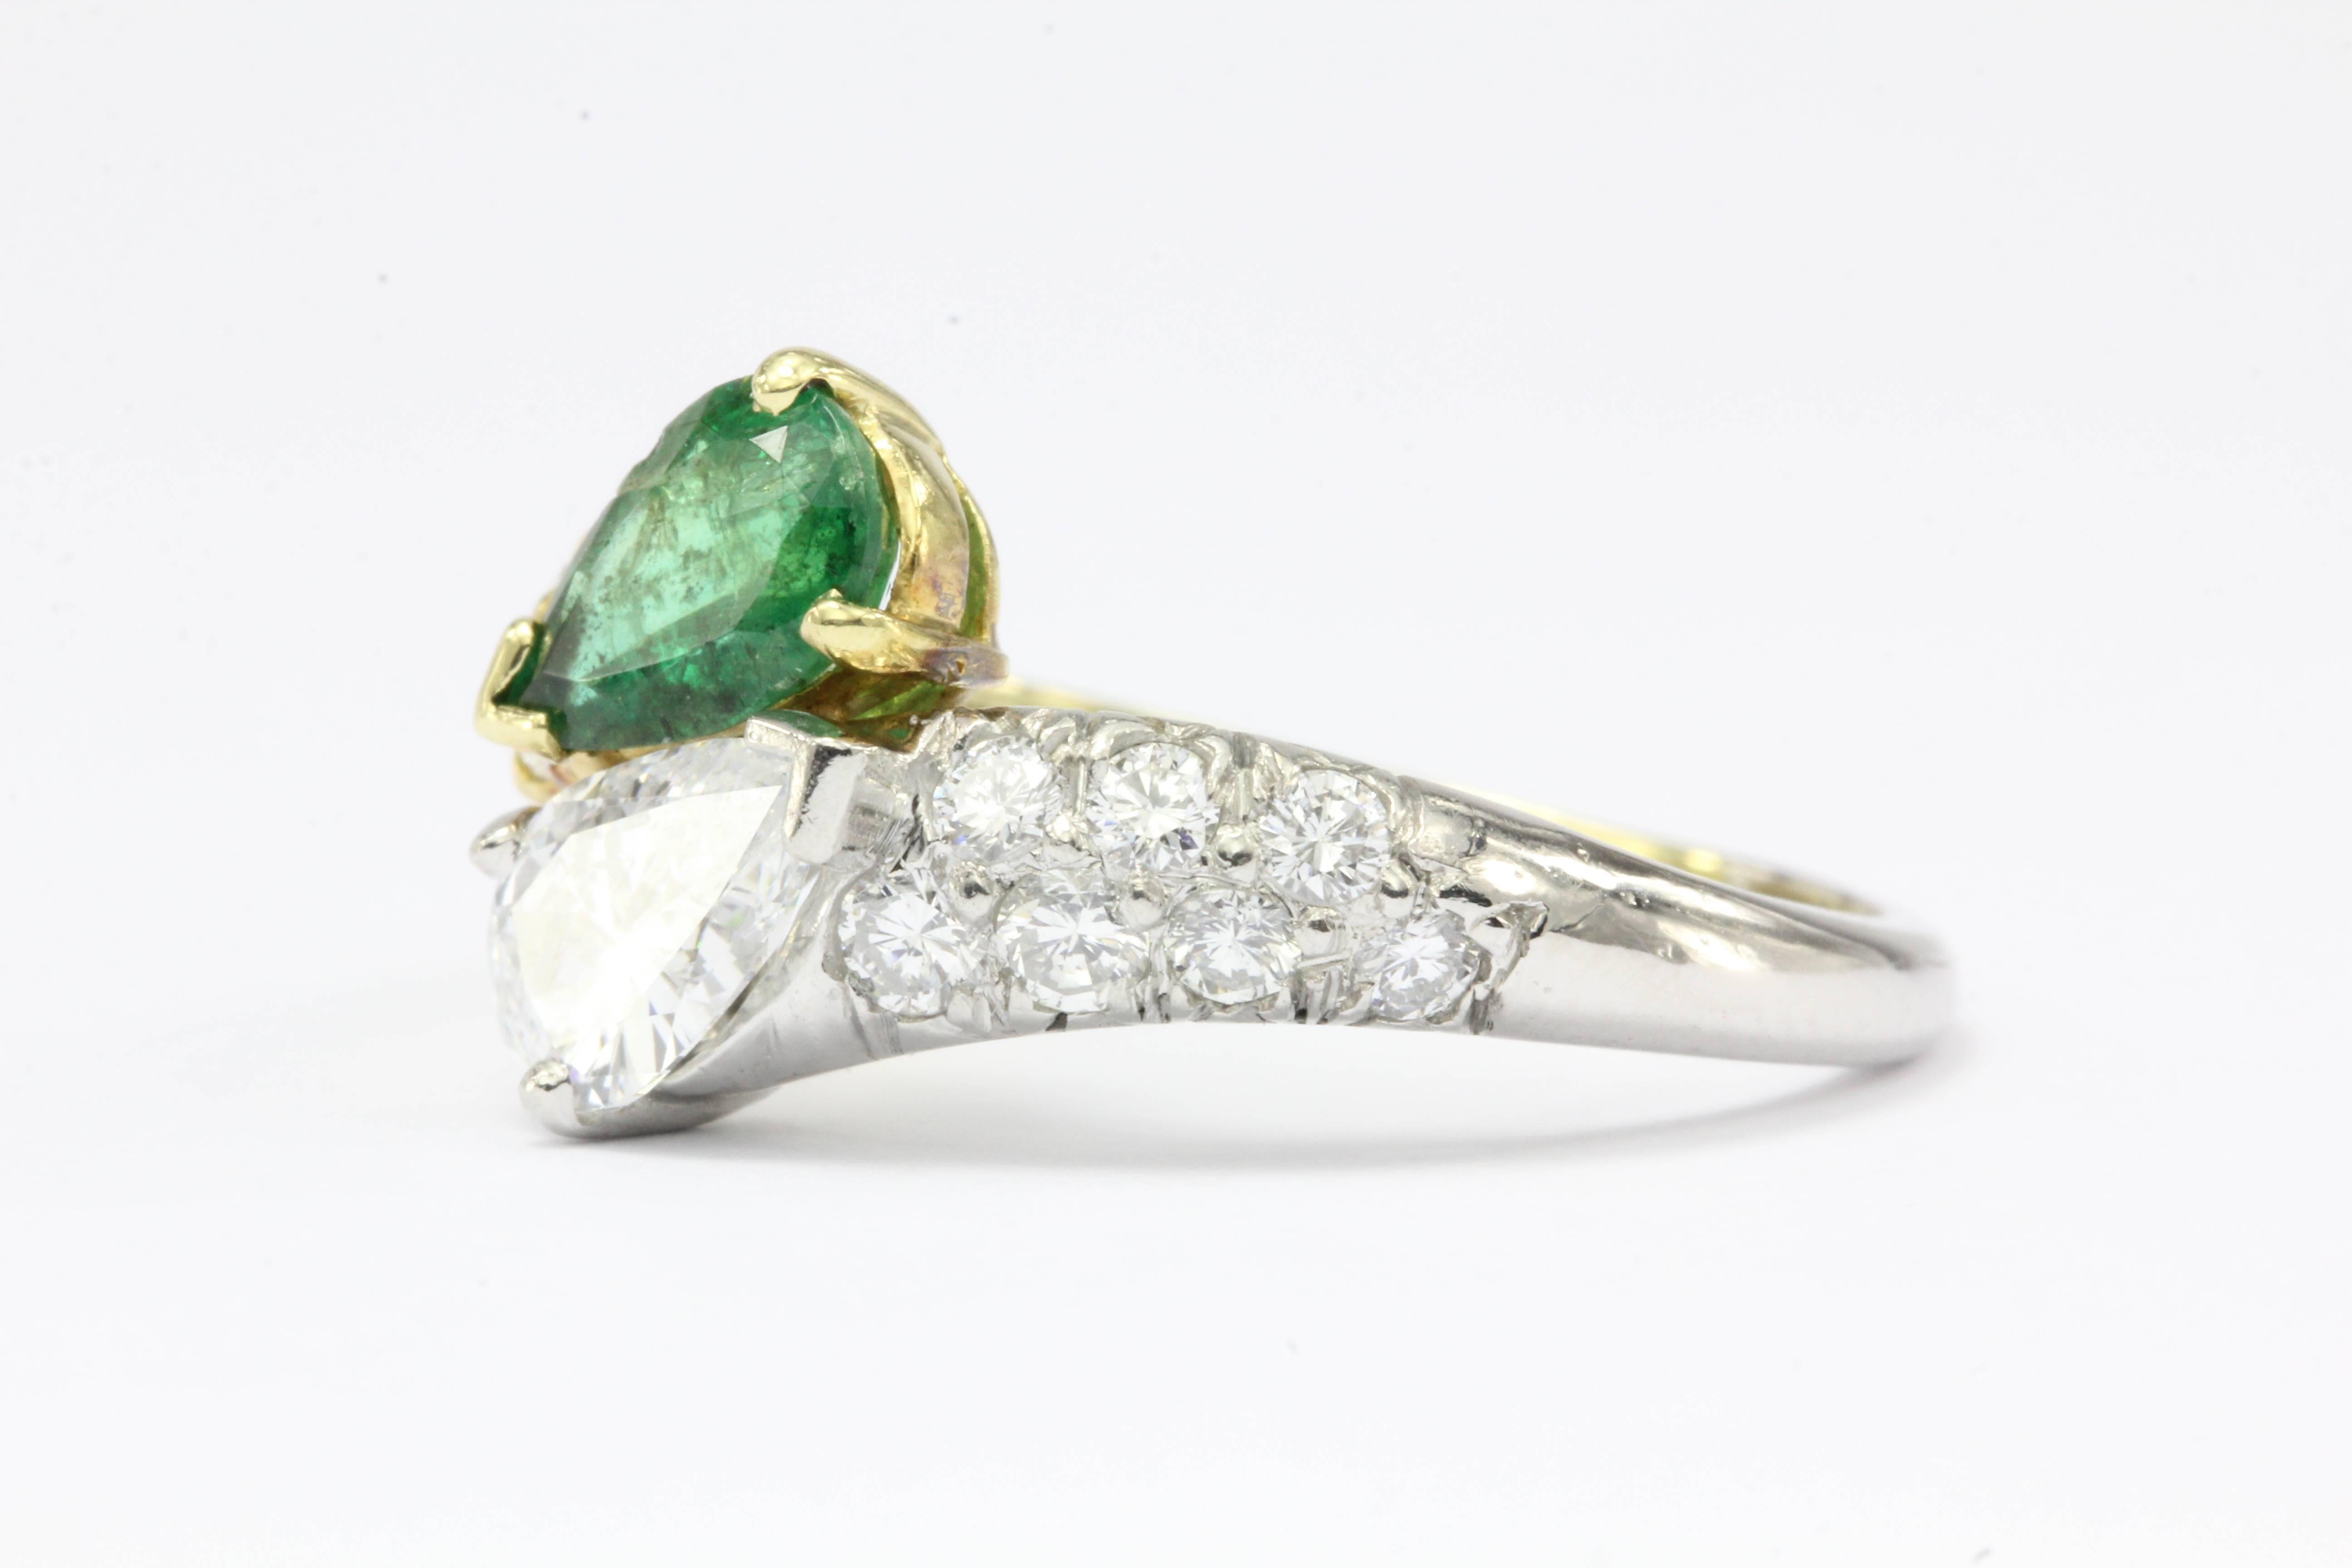 A gemstone studded yin & yang created half in platinum and the other half in 18k yellow gold set with diamonds and emeralds, this ring is the perfect way to celebrate that special bond. The pear cut diamond is approximately .60carats, E/F color,